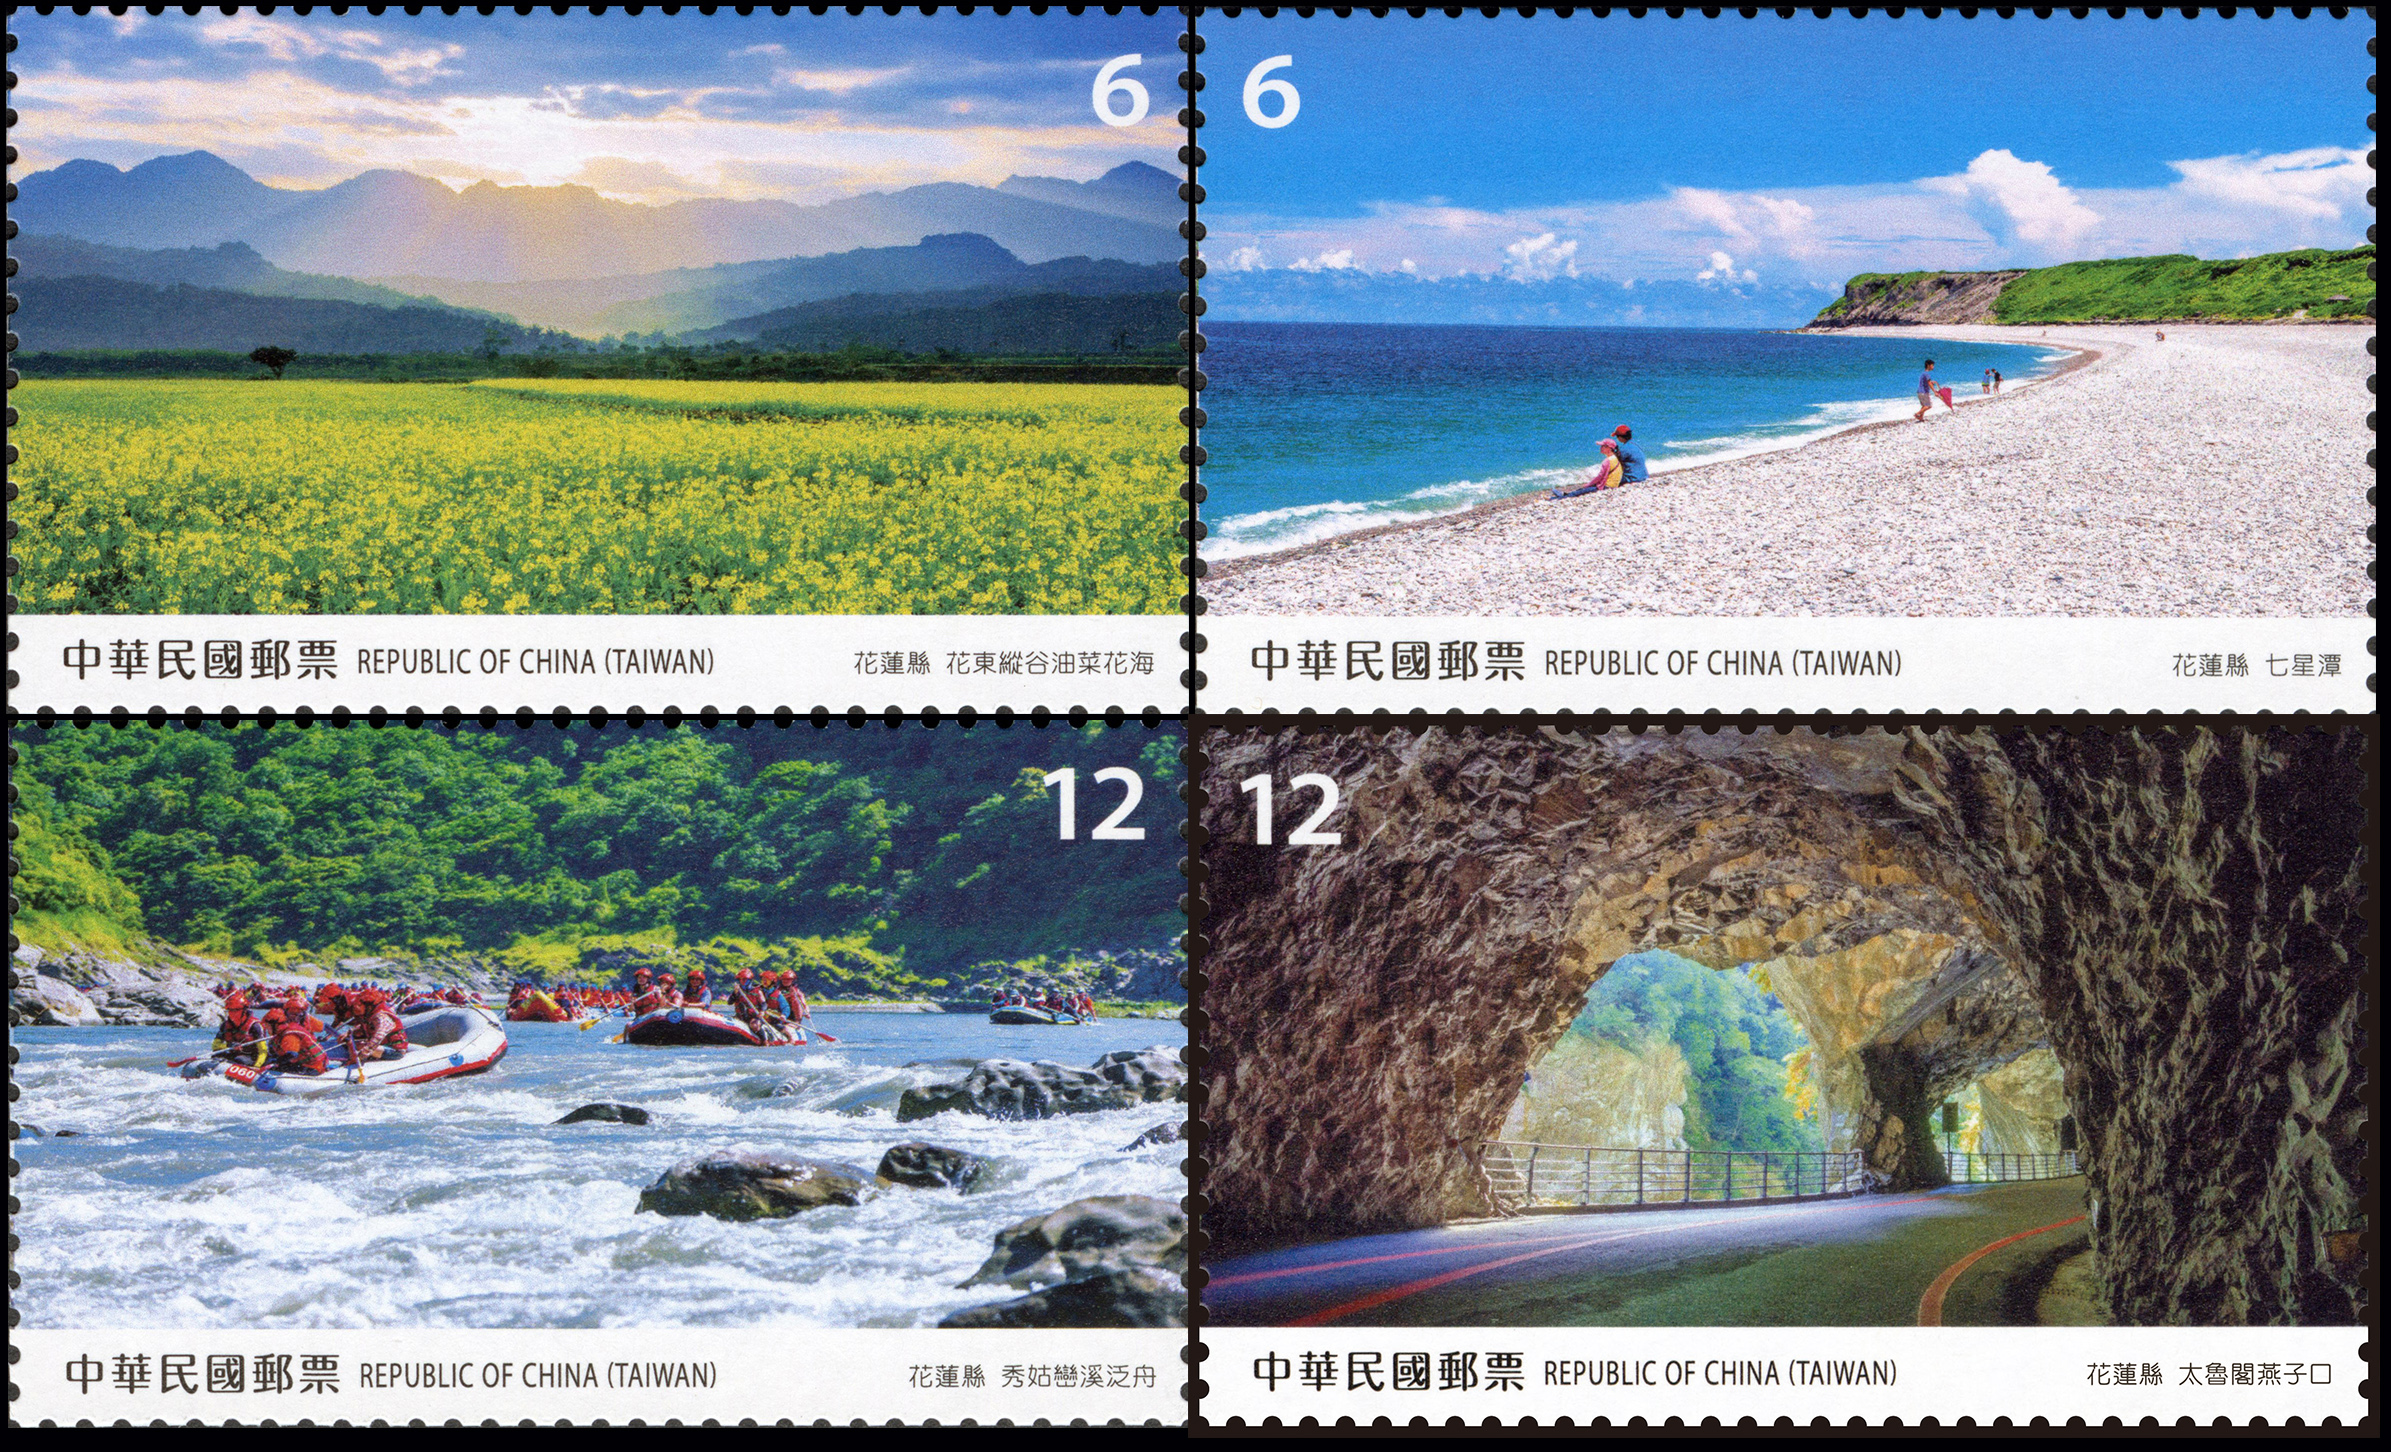 Taiwan Scenery Postage Stamps — Hualien County